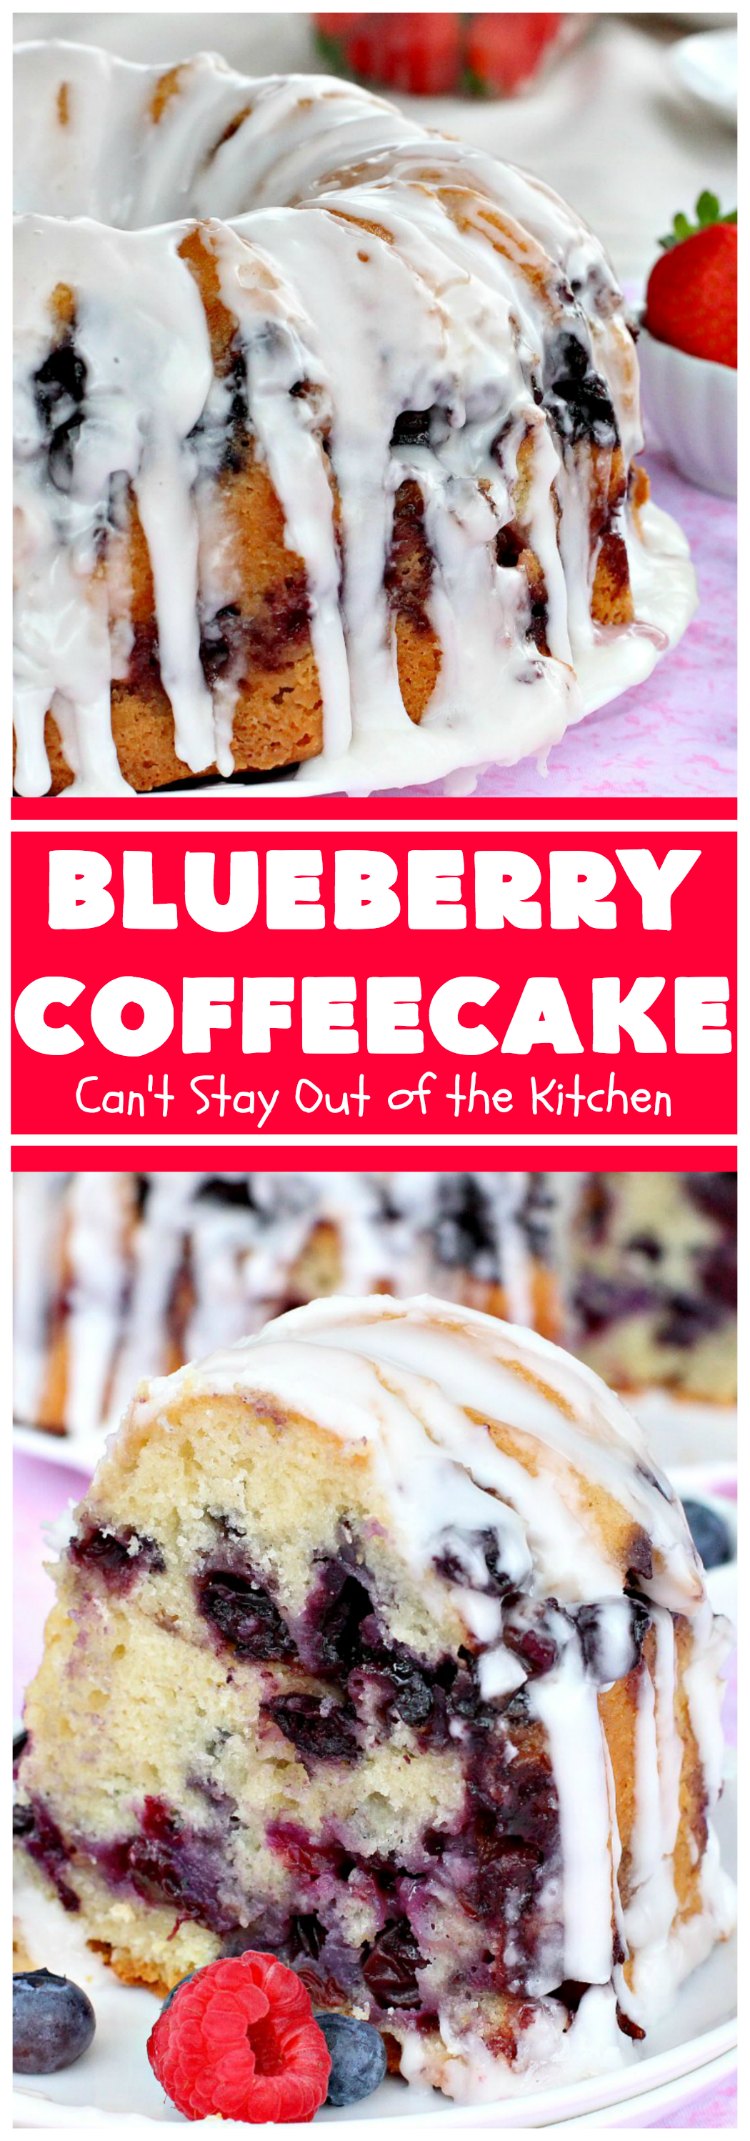 Blueberry Coffeecake | Can't Stay Out of the Kitchen